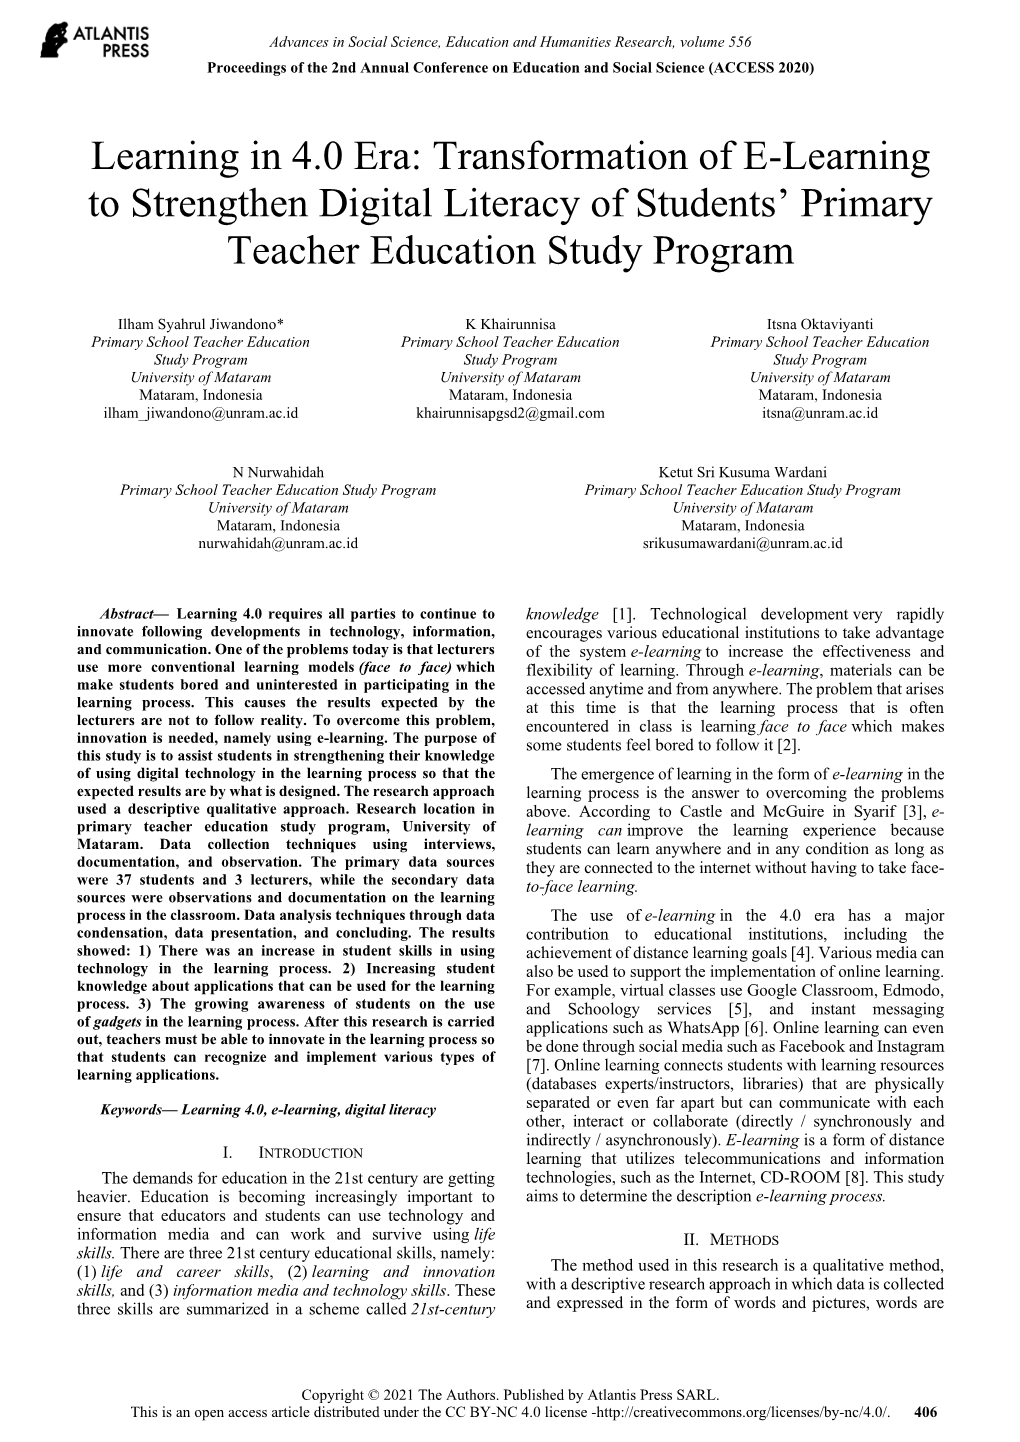 Transformation of E-Learning to Strengthen Digital Literacy of Students' Primary Teacher Education Study